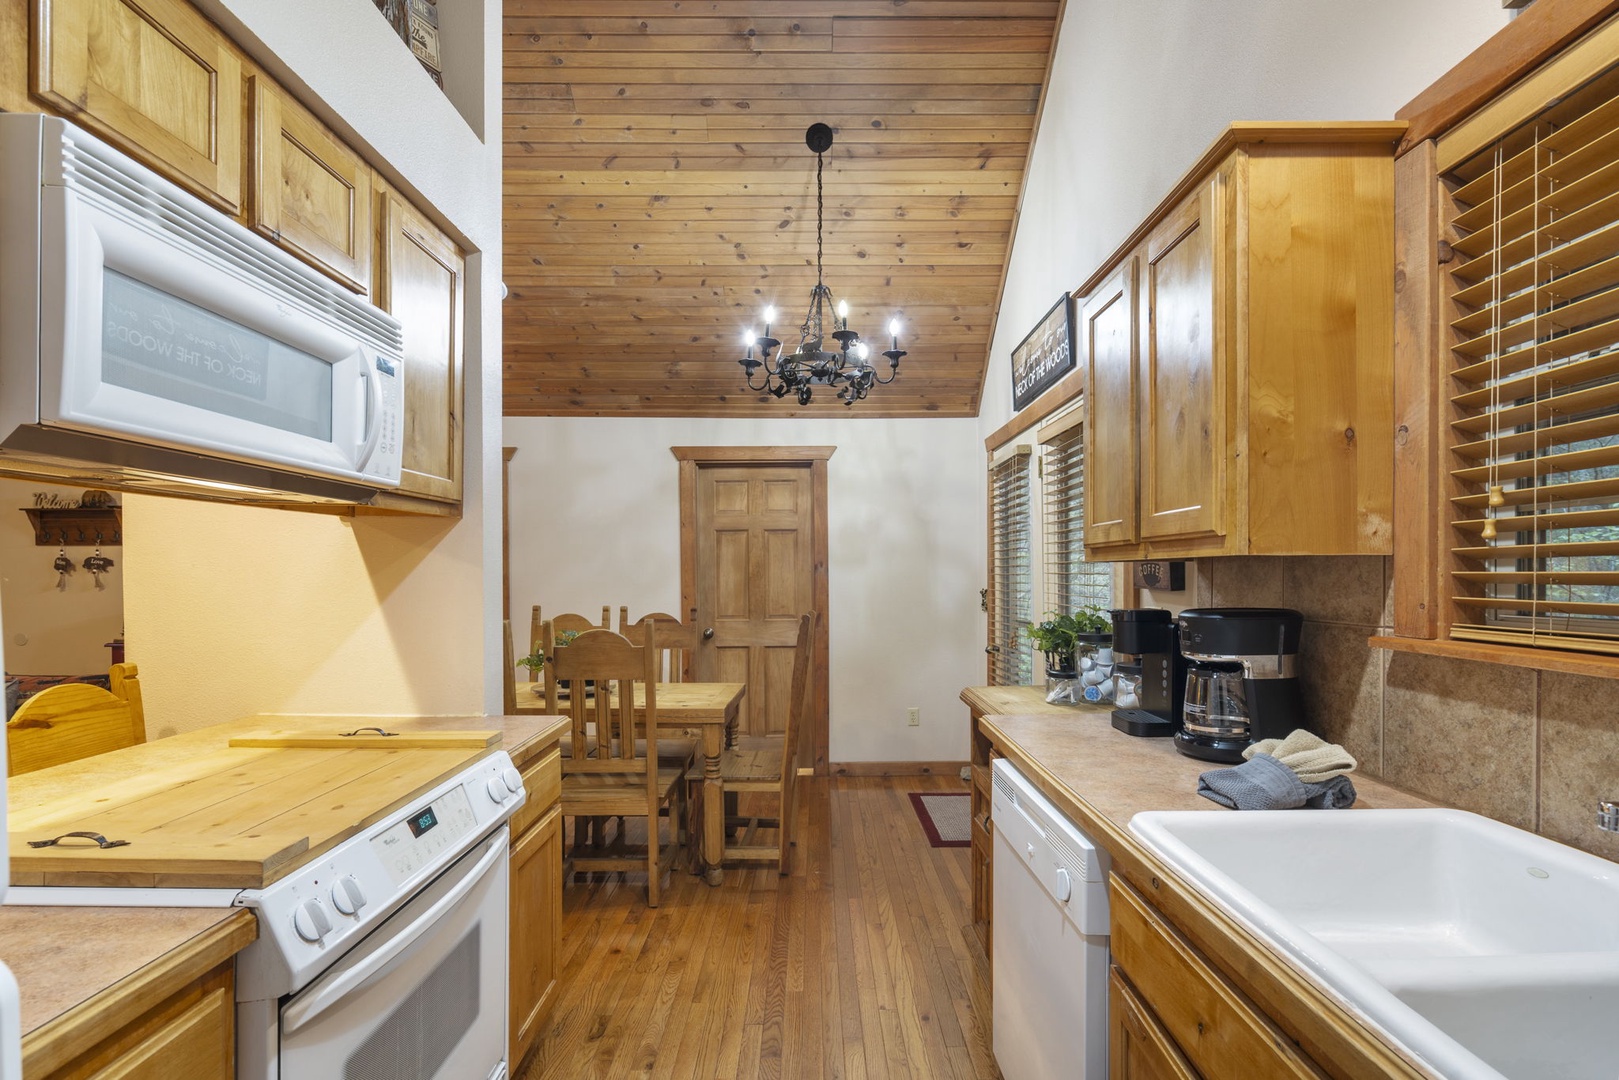 Explore the spacious kitchen, offering all the comforts of home